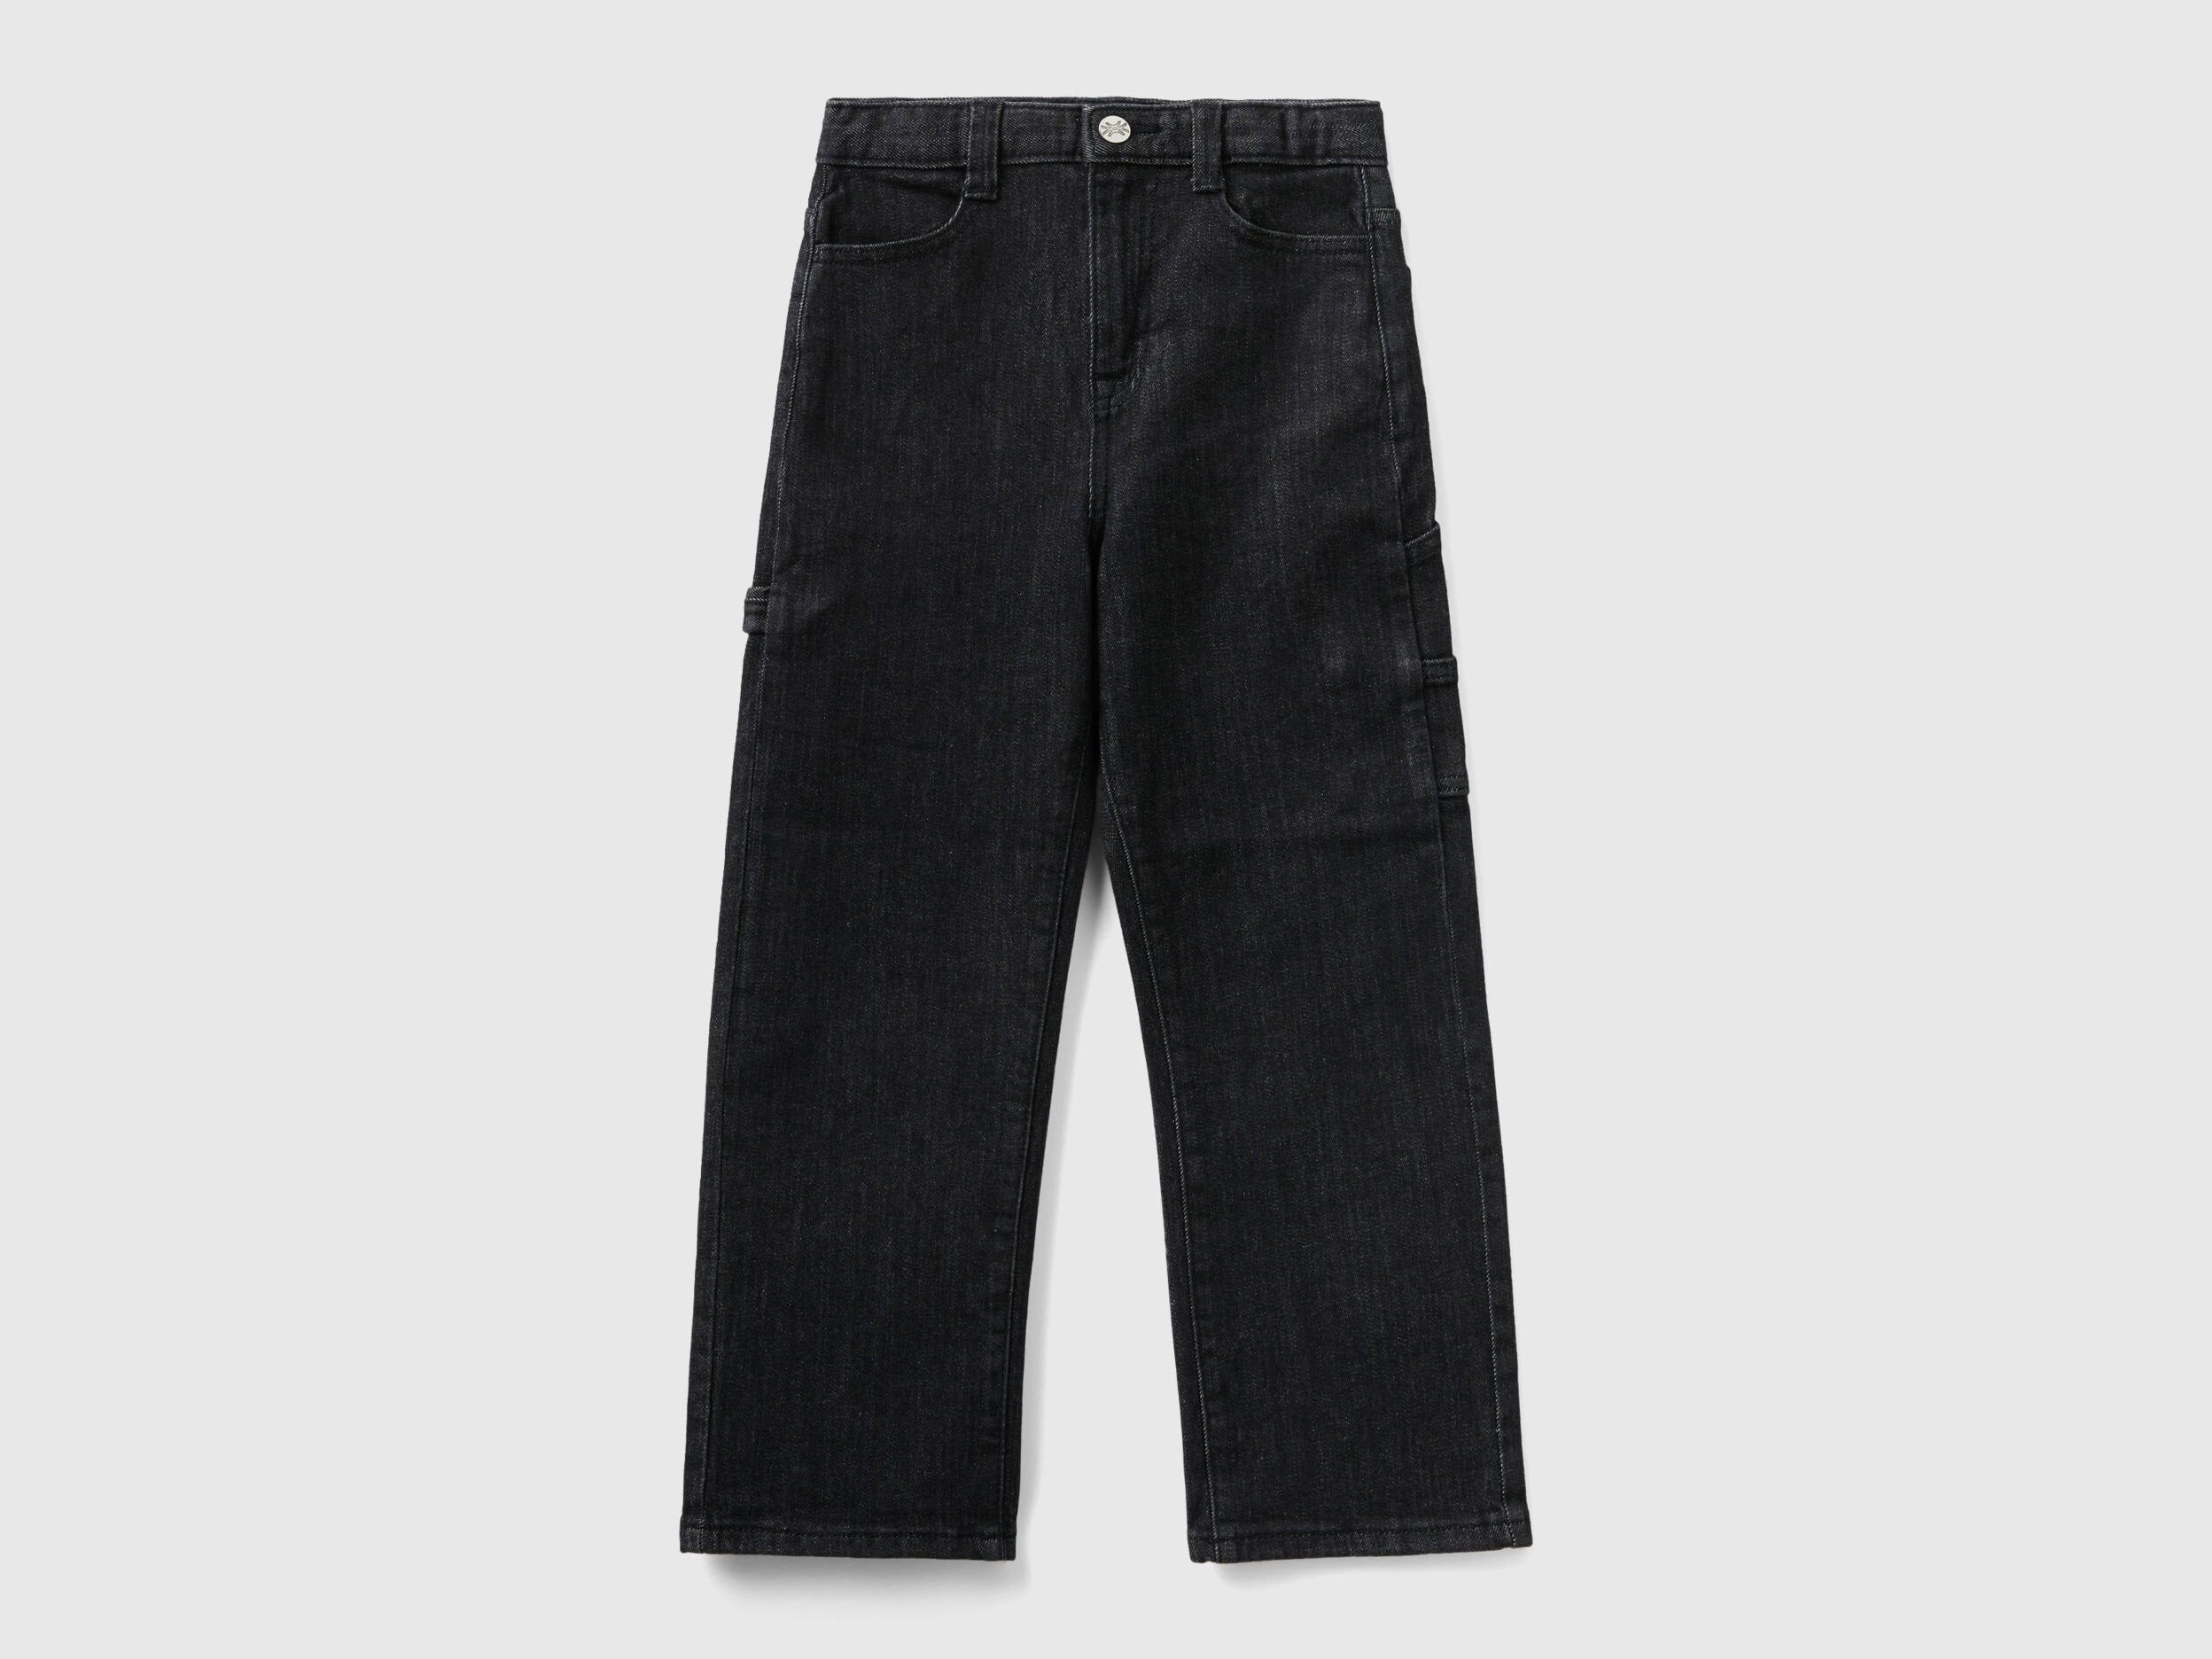 Worker Style Jeans_4EJVCF02F_700_01